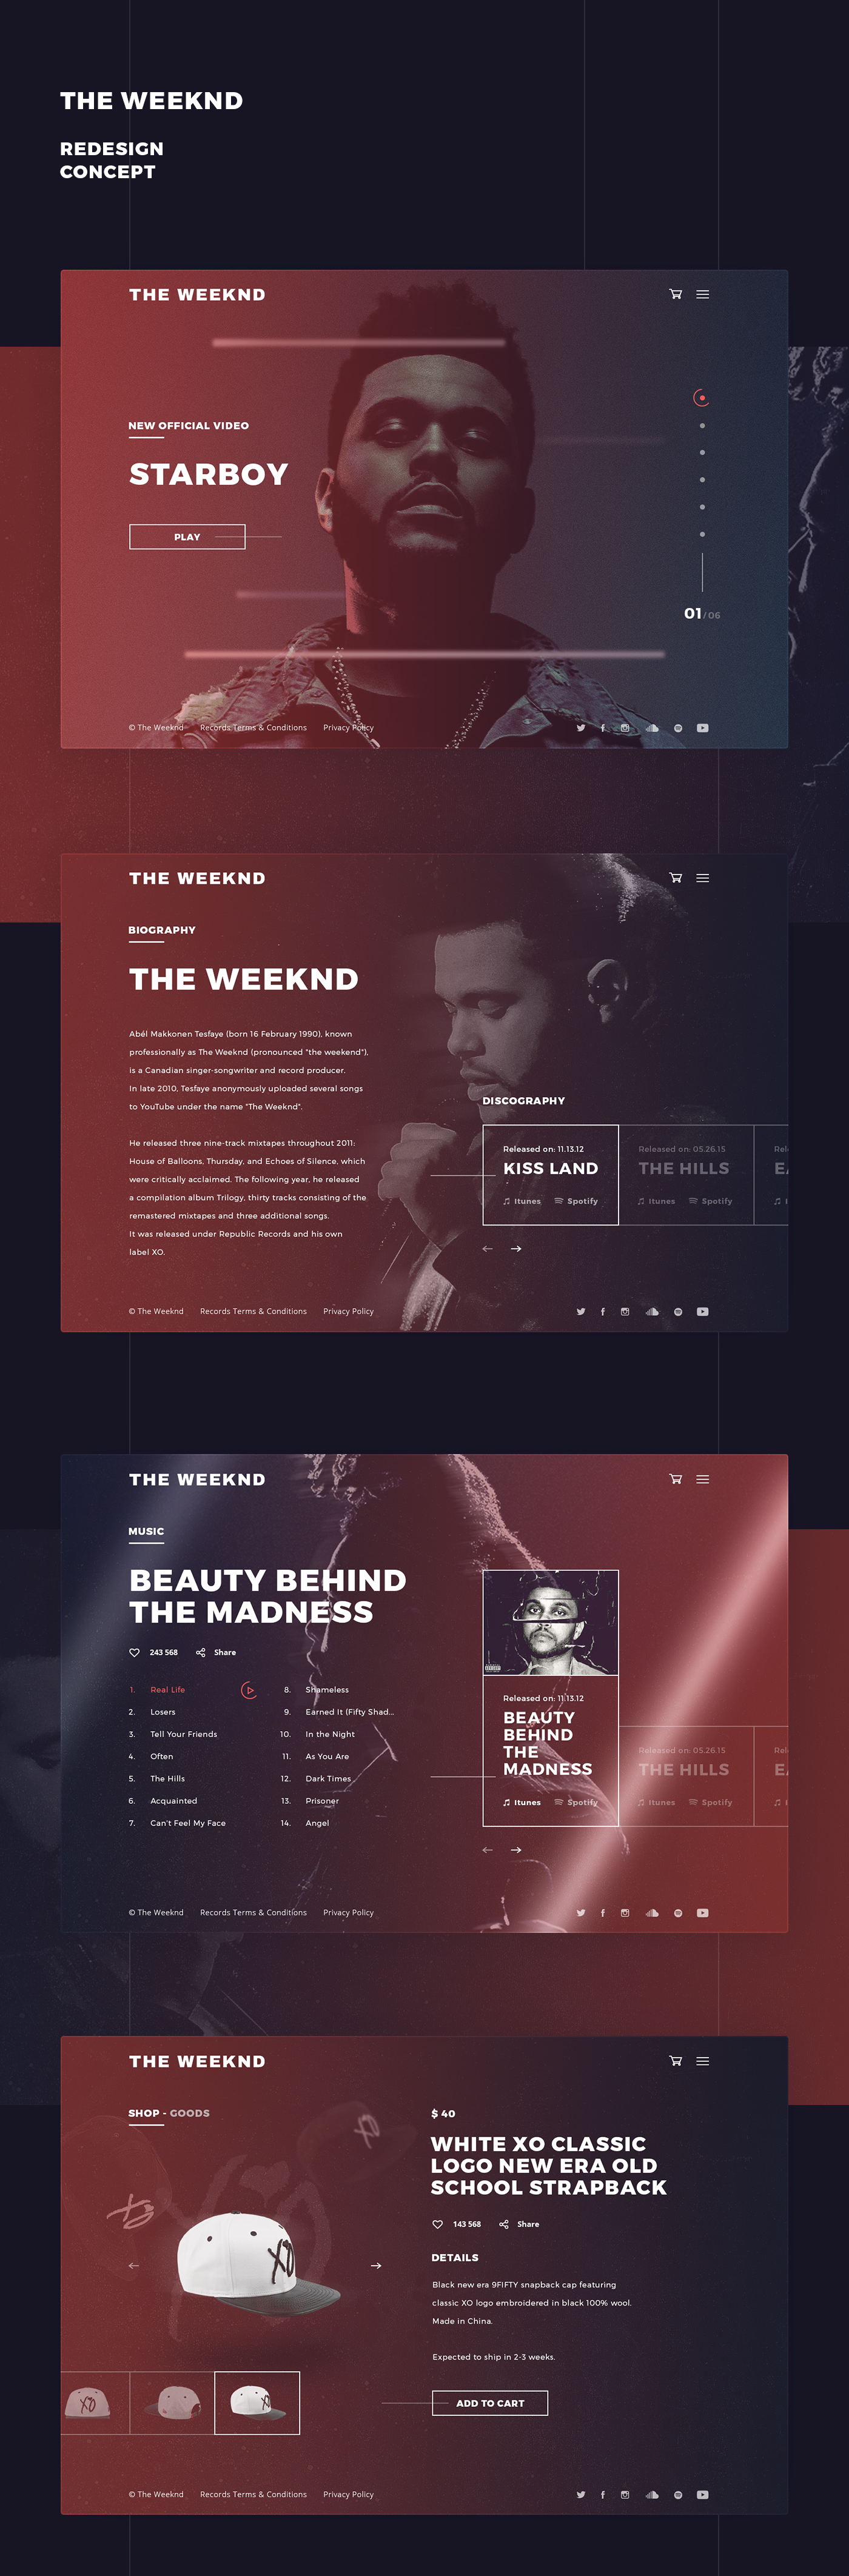 redesign concept The_Weeknd music Web